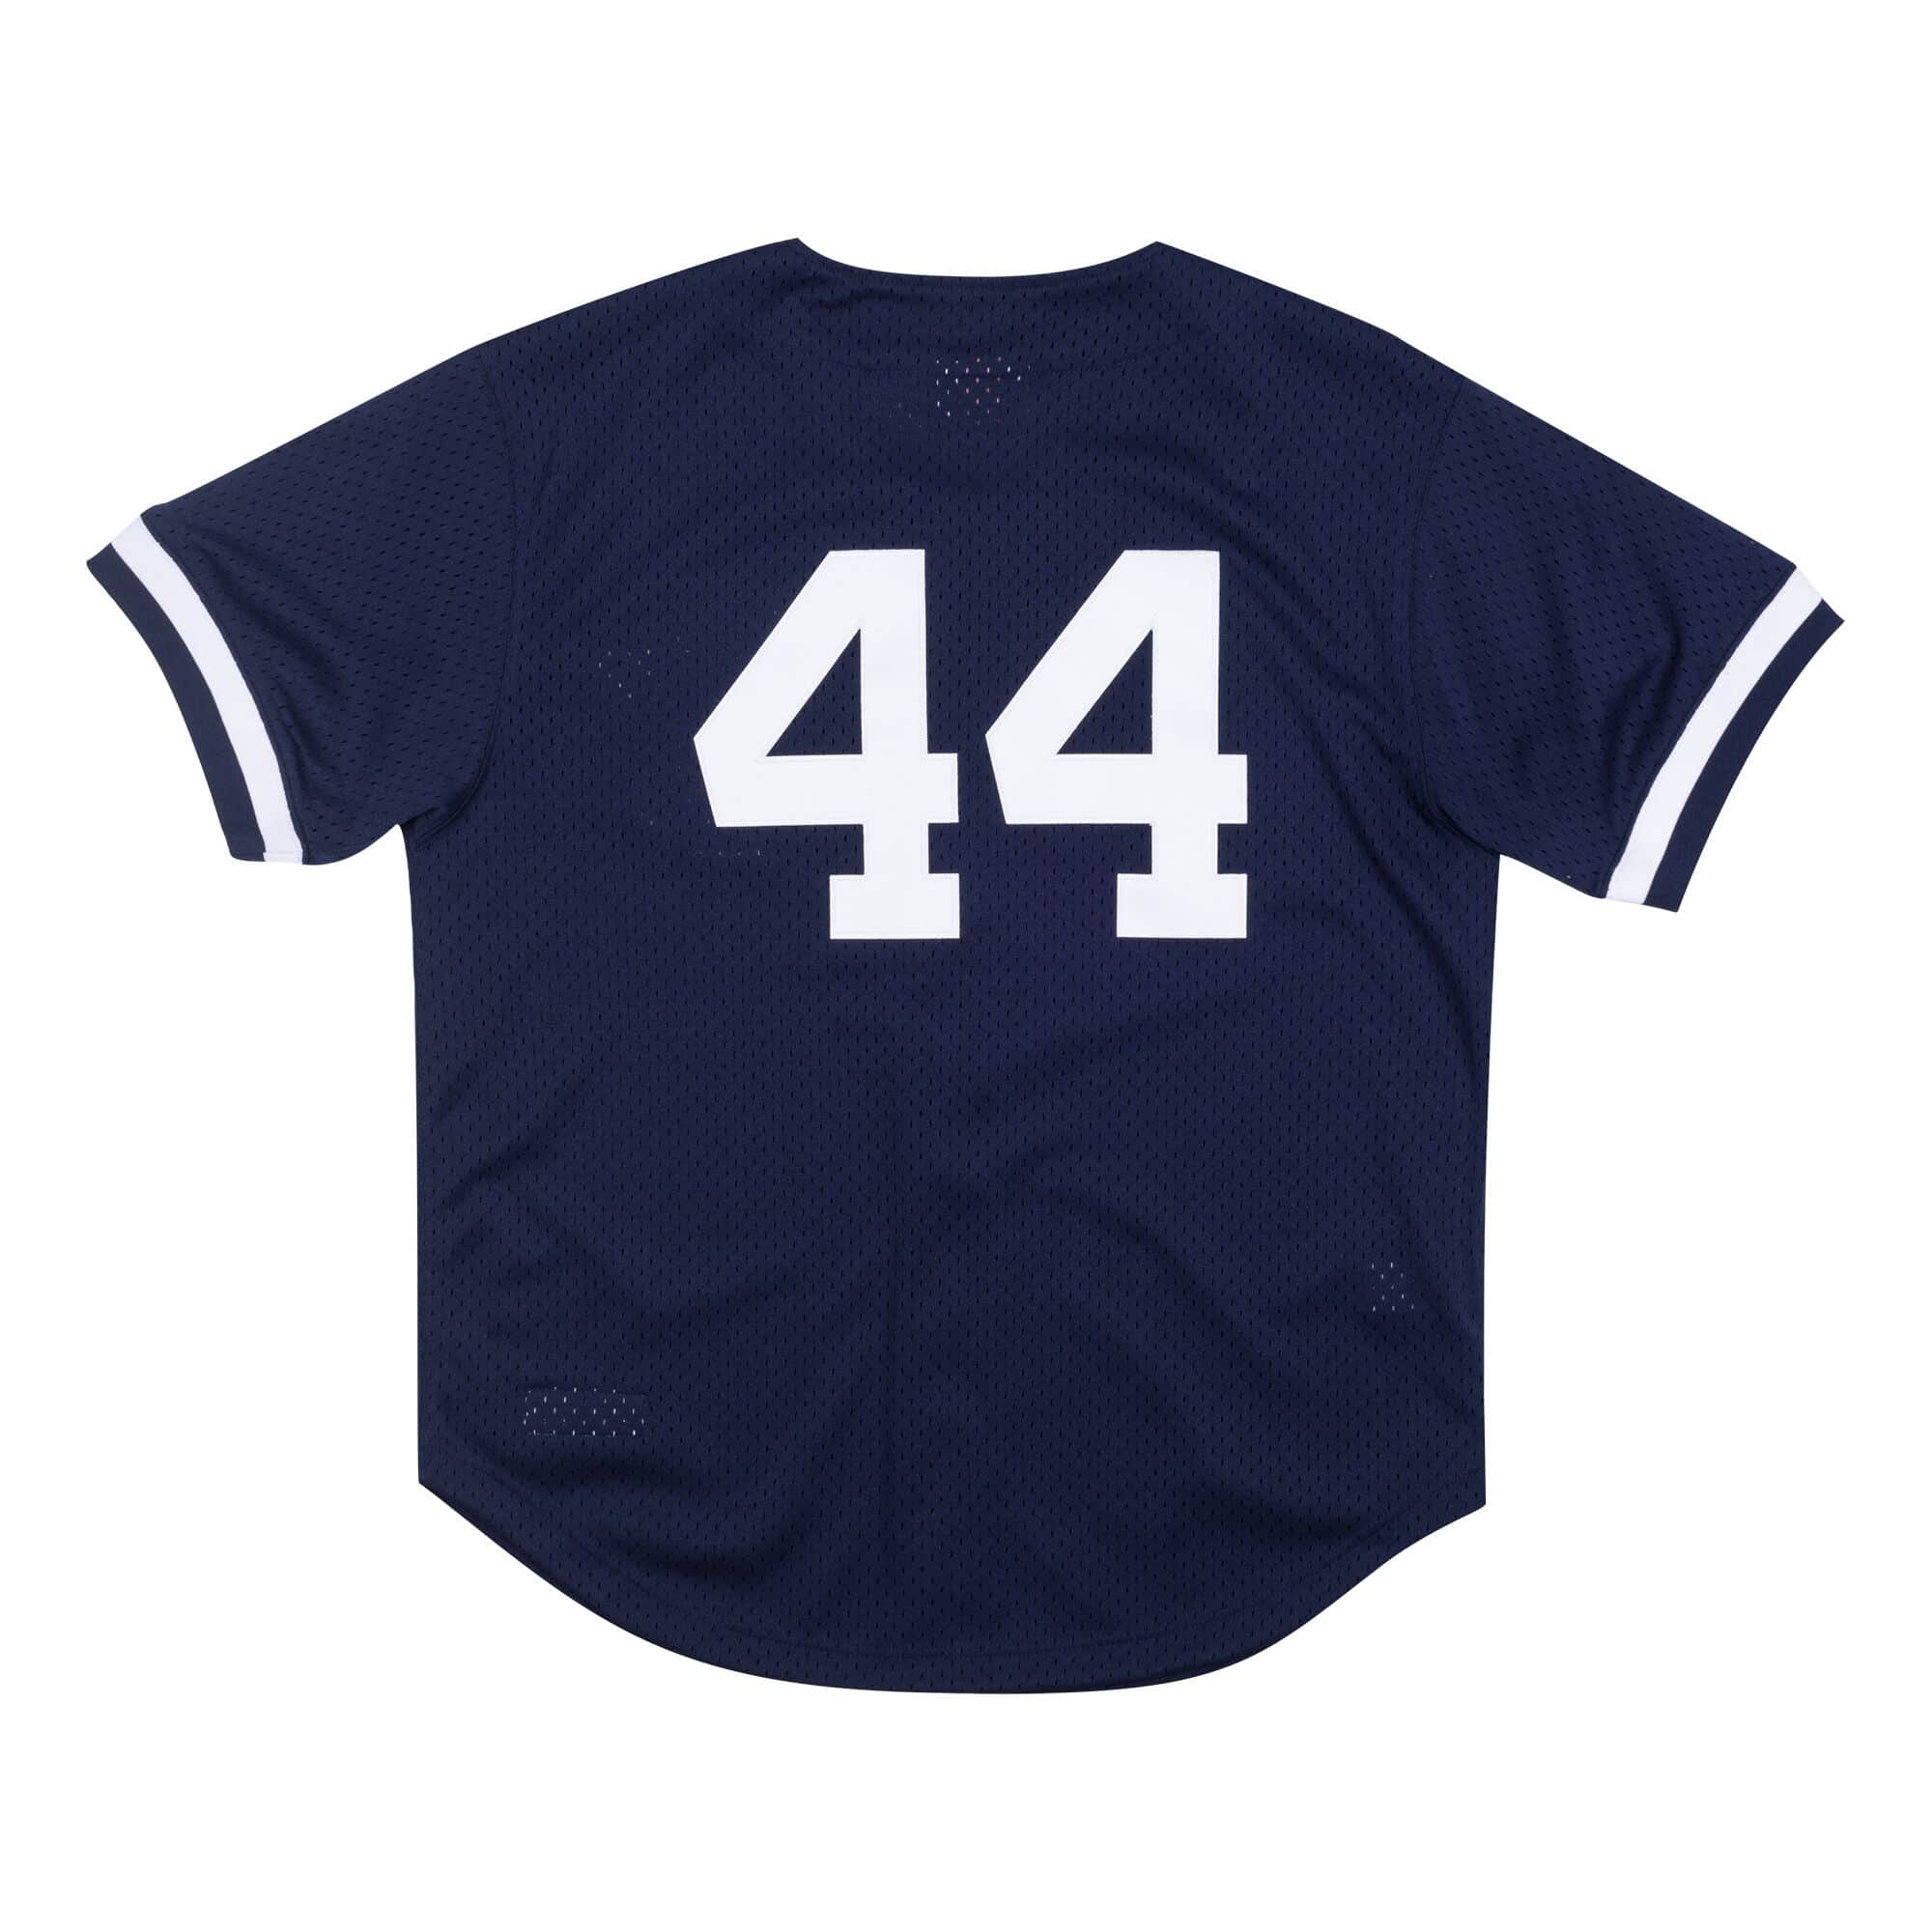 Majestic New York Yankees Cool Base Pullover Practice Jersey